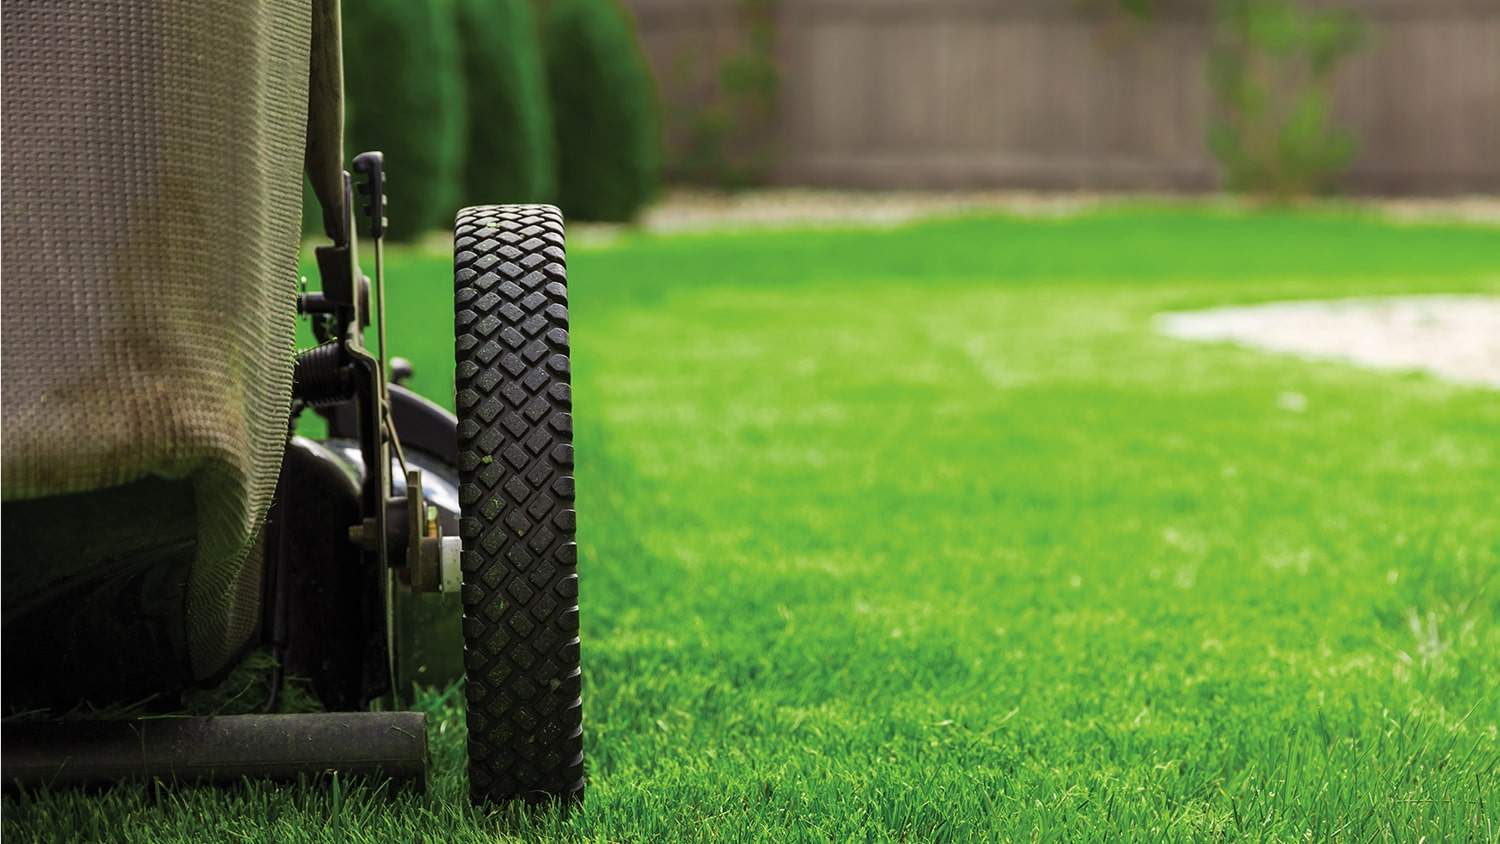 close up view of lawnmower on grass